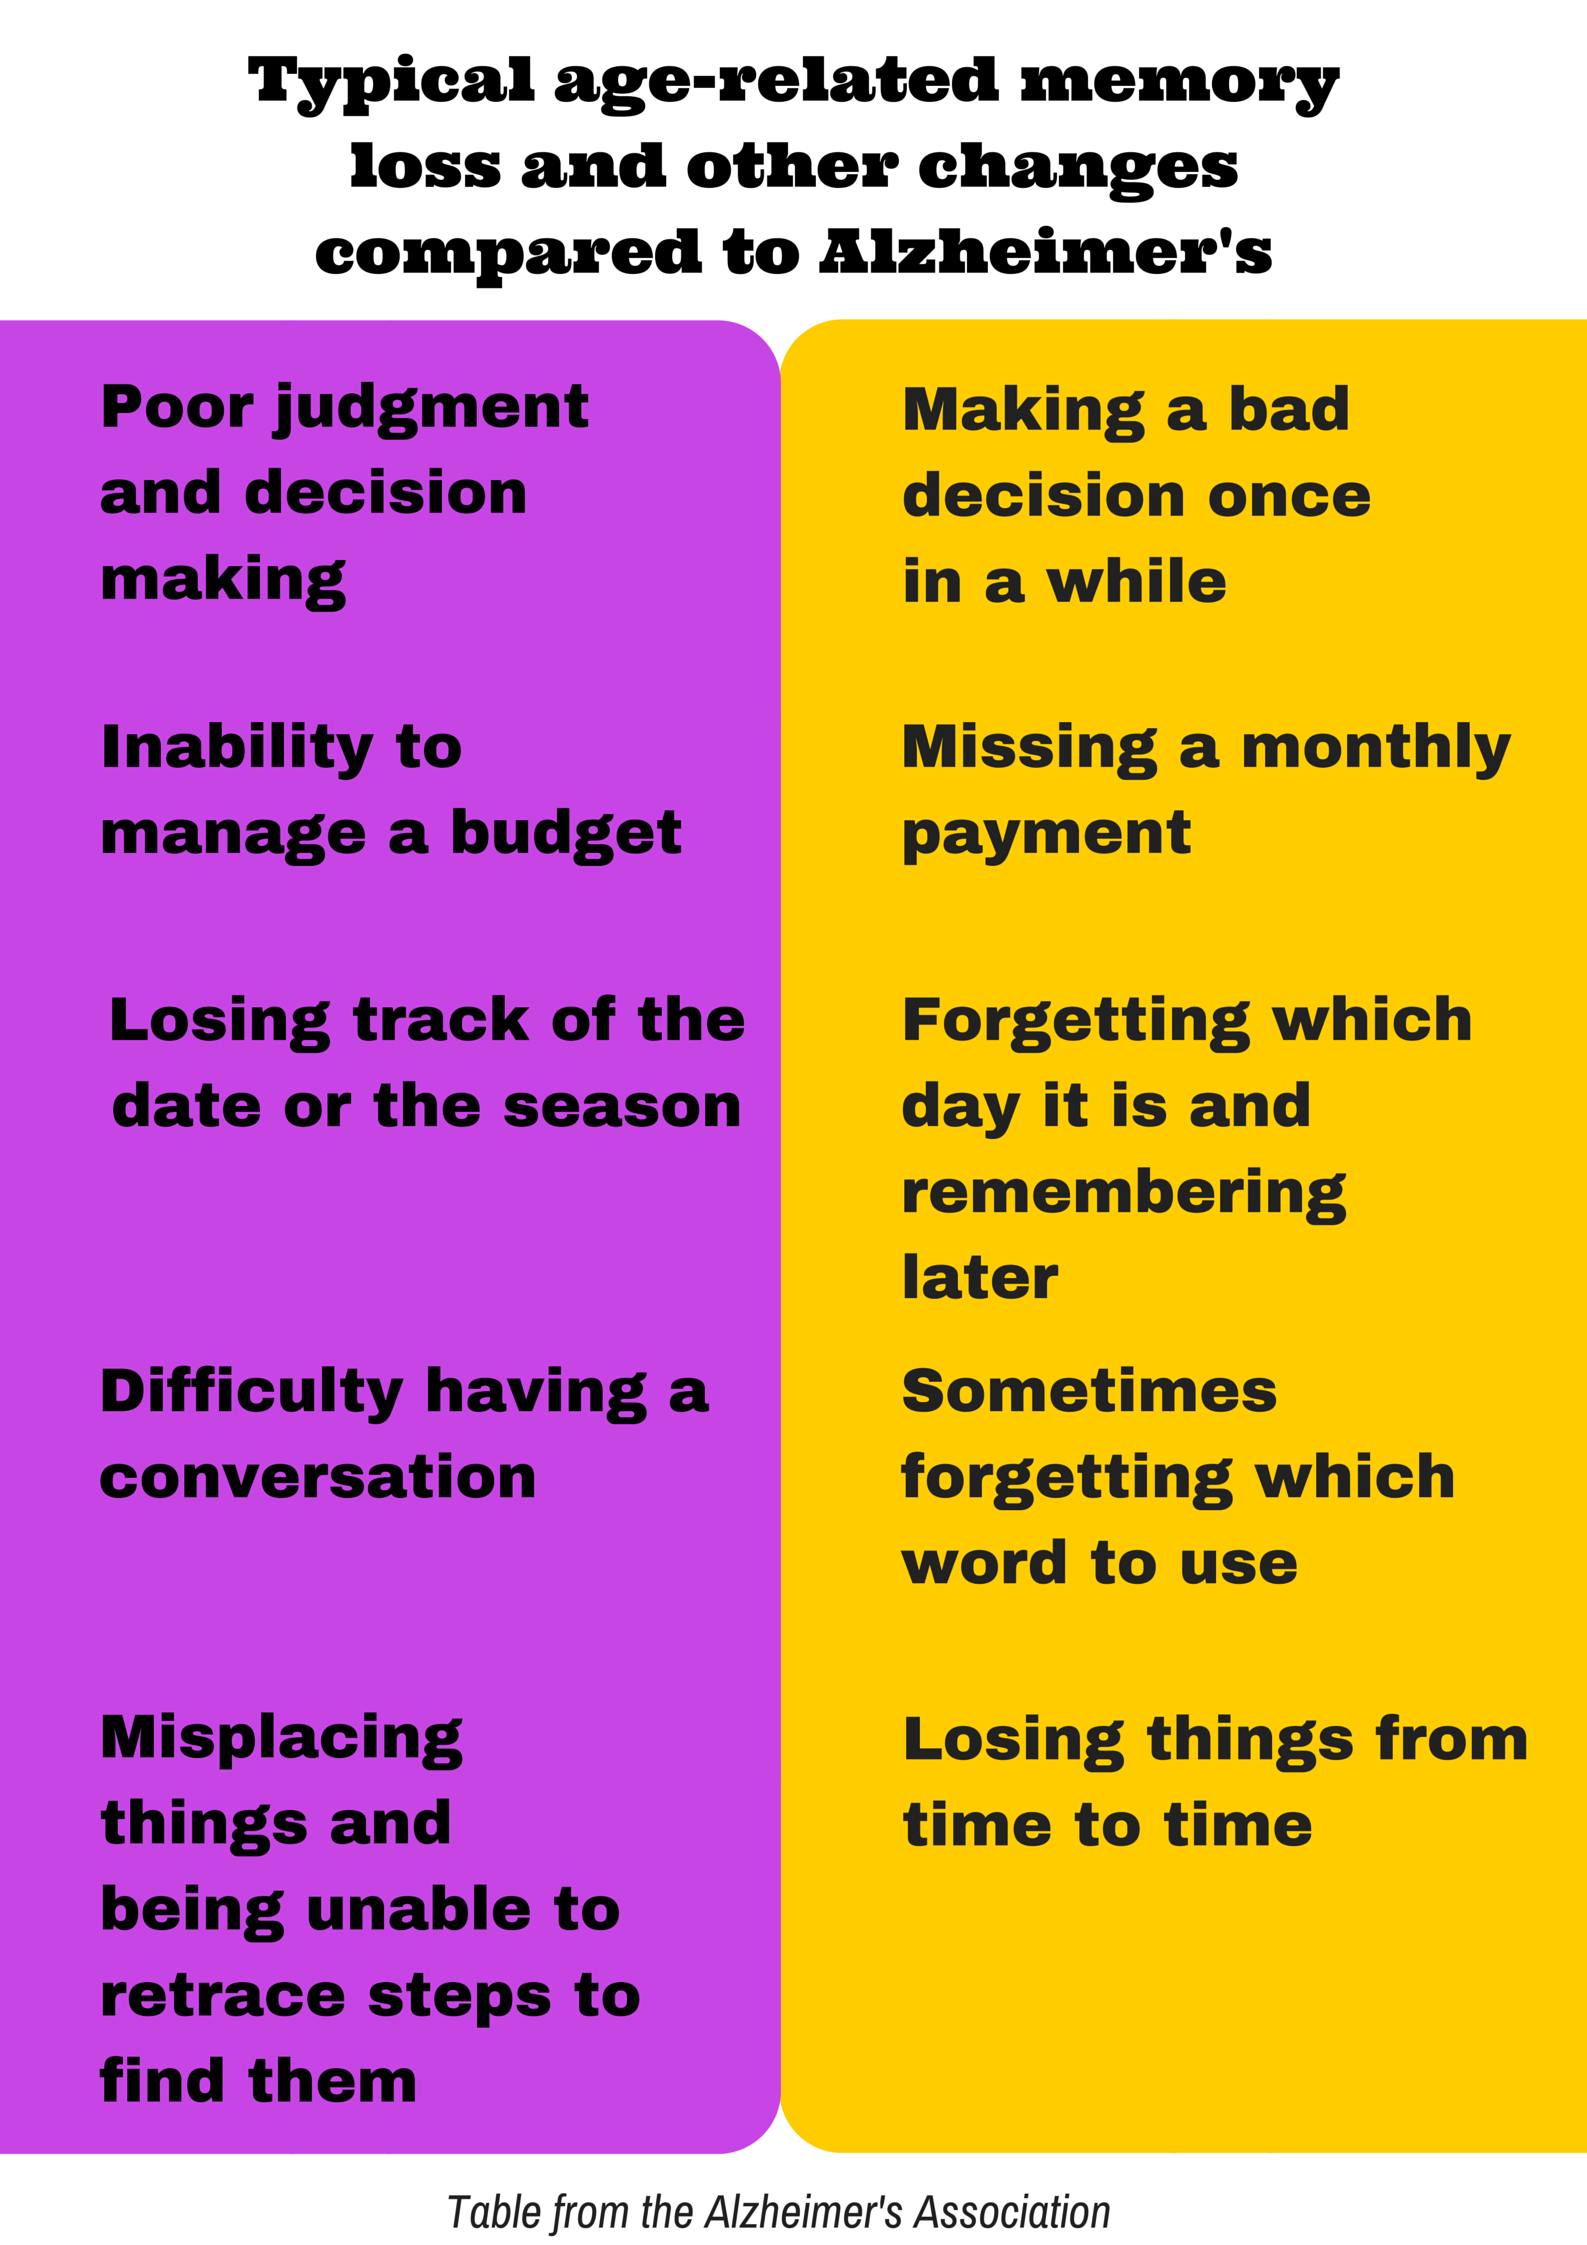 According to the Alzheimer’s Association, nearly one in every three seniors who dies each year has Alzheimer’s or another dementia. This table shows the differences between Alzheimer’s behavior, listed on the left, and age-related behaviors, listed on the right, in certain situations.